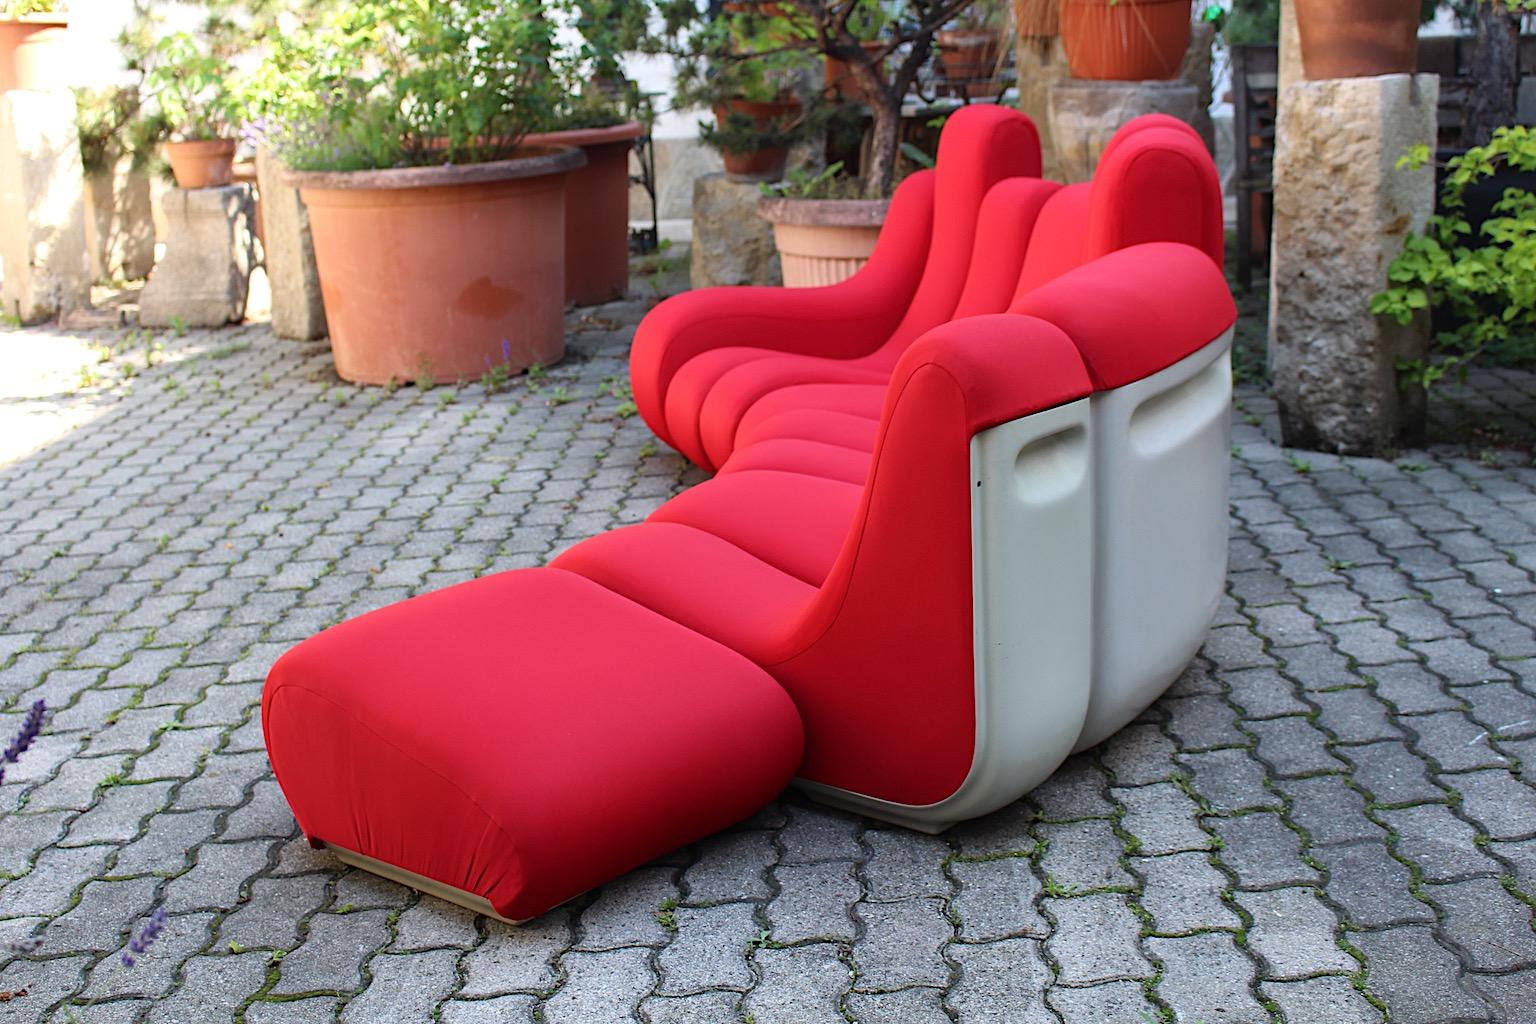 Space Age Vintage Red Sectional Freestanding Sofa Vario Pillo Burghardt Vogtherr For Sale 7